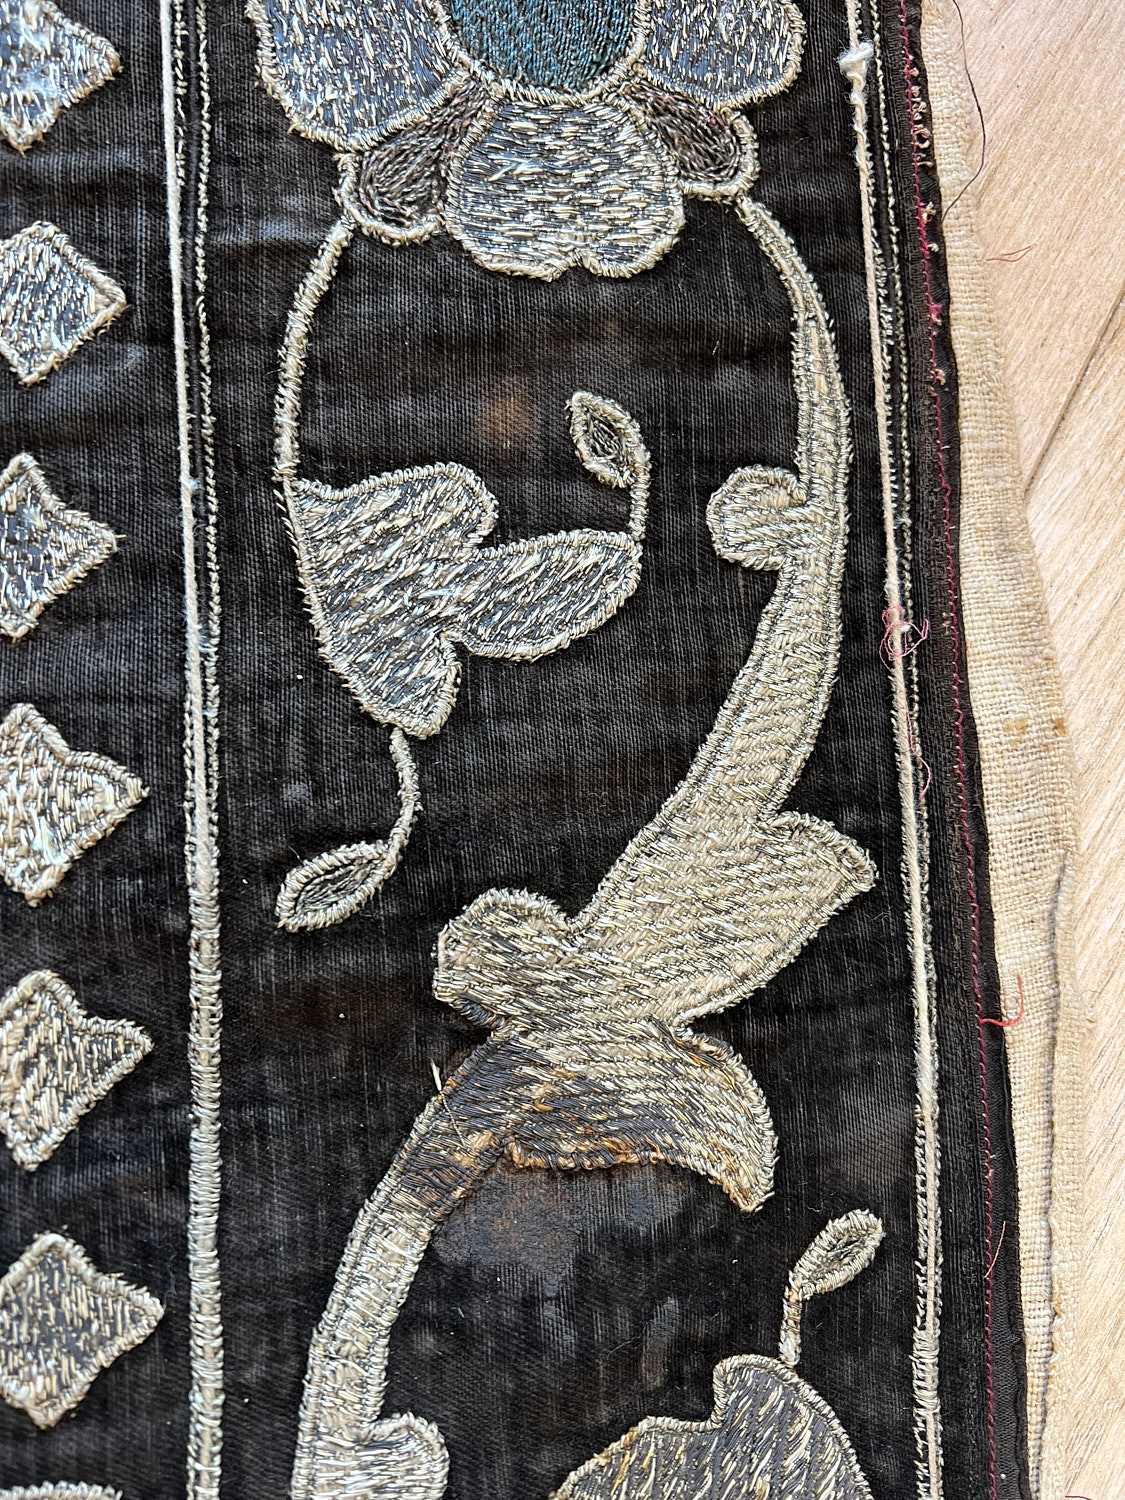 AN EARLY 19TH CENTURY OTTOMAN VELVET AND METAL THREAD TEXTILE, PERSIAN - Image 3 of 8